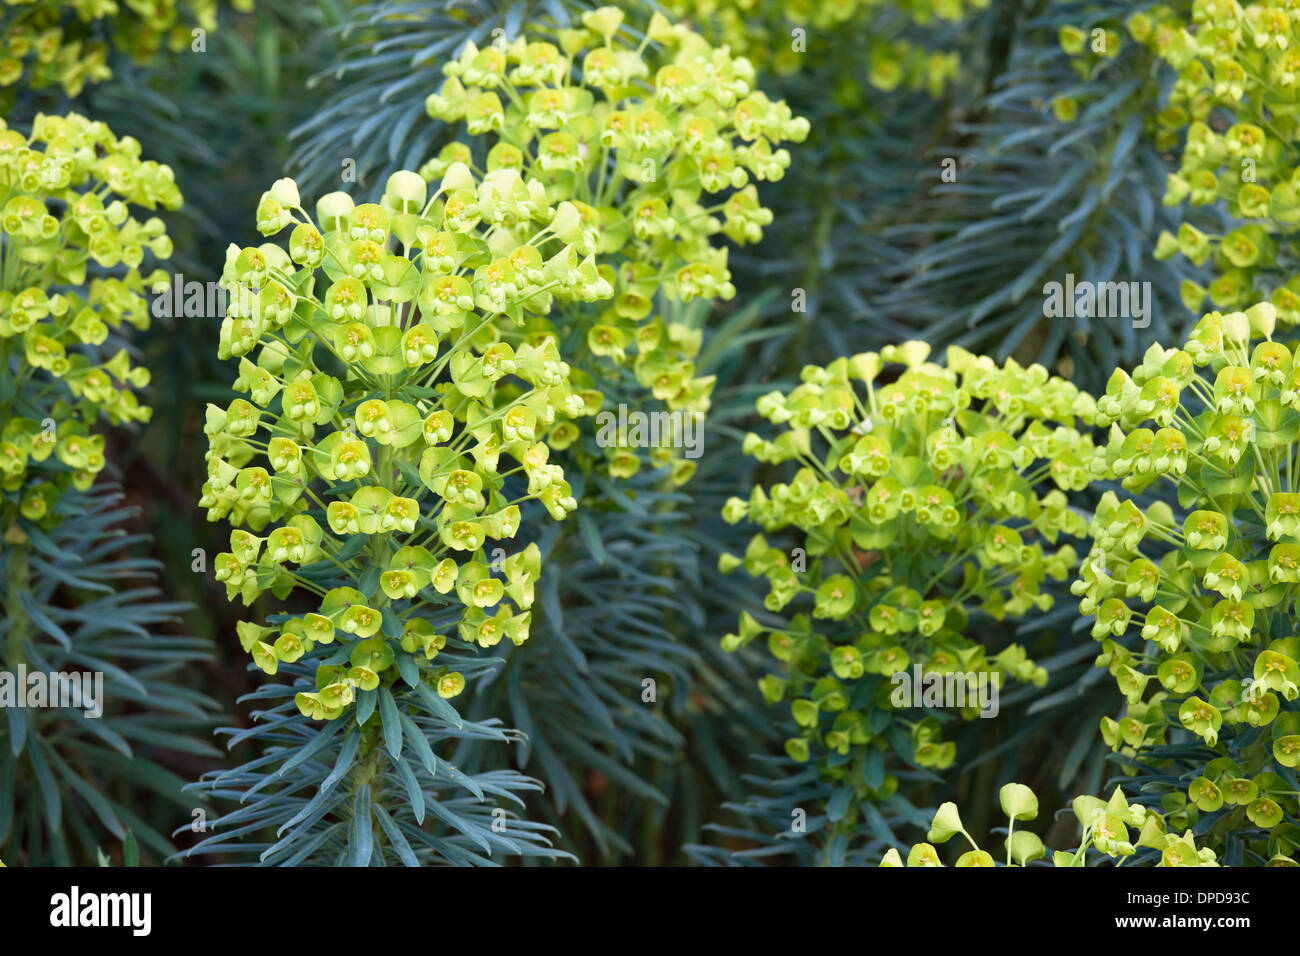 Close up of Euphorbia flowers with shallow depth of field. Stock Photo